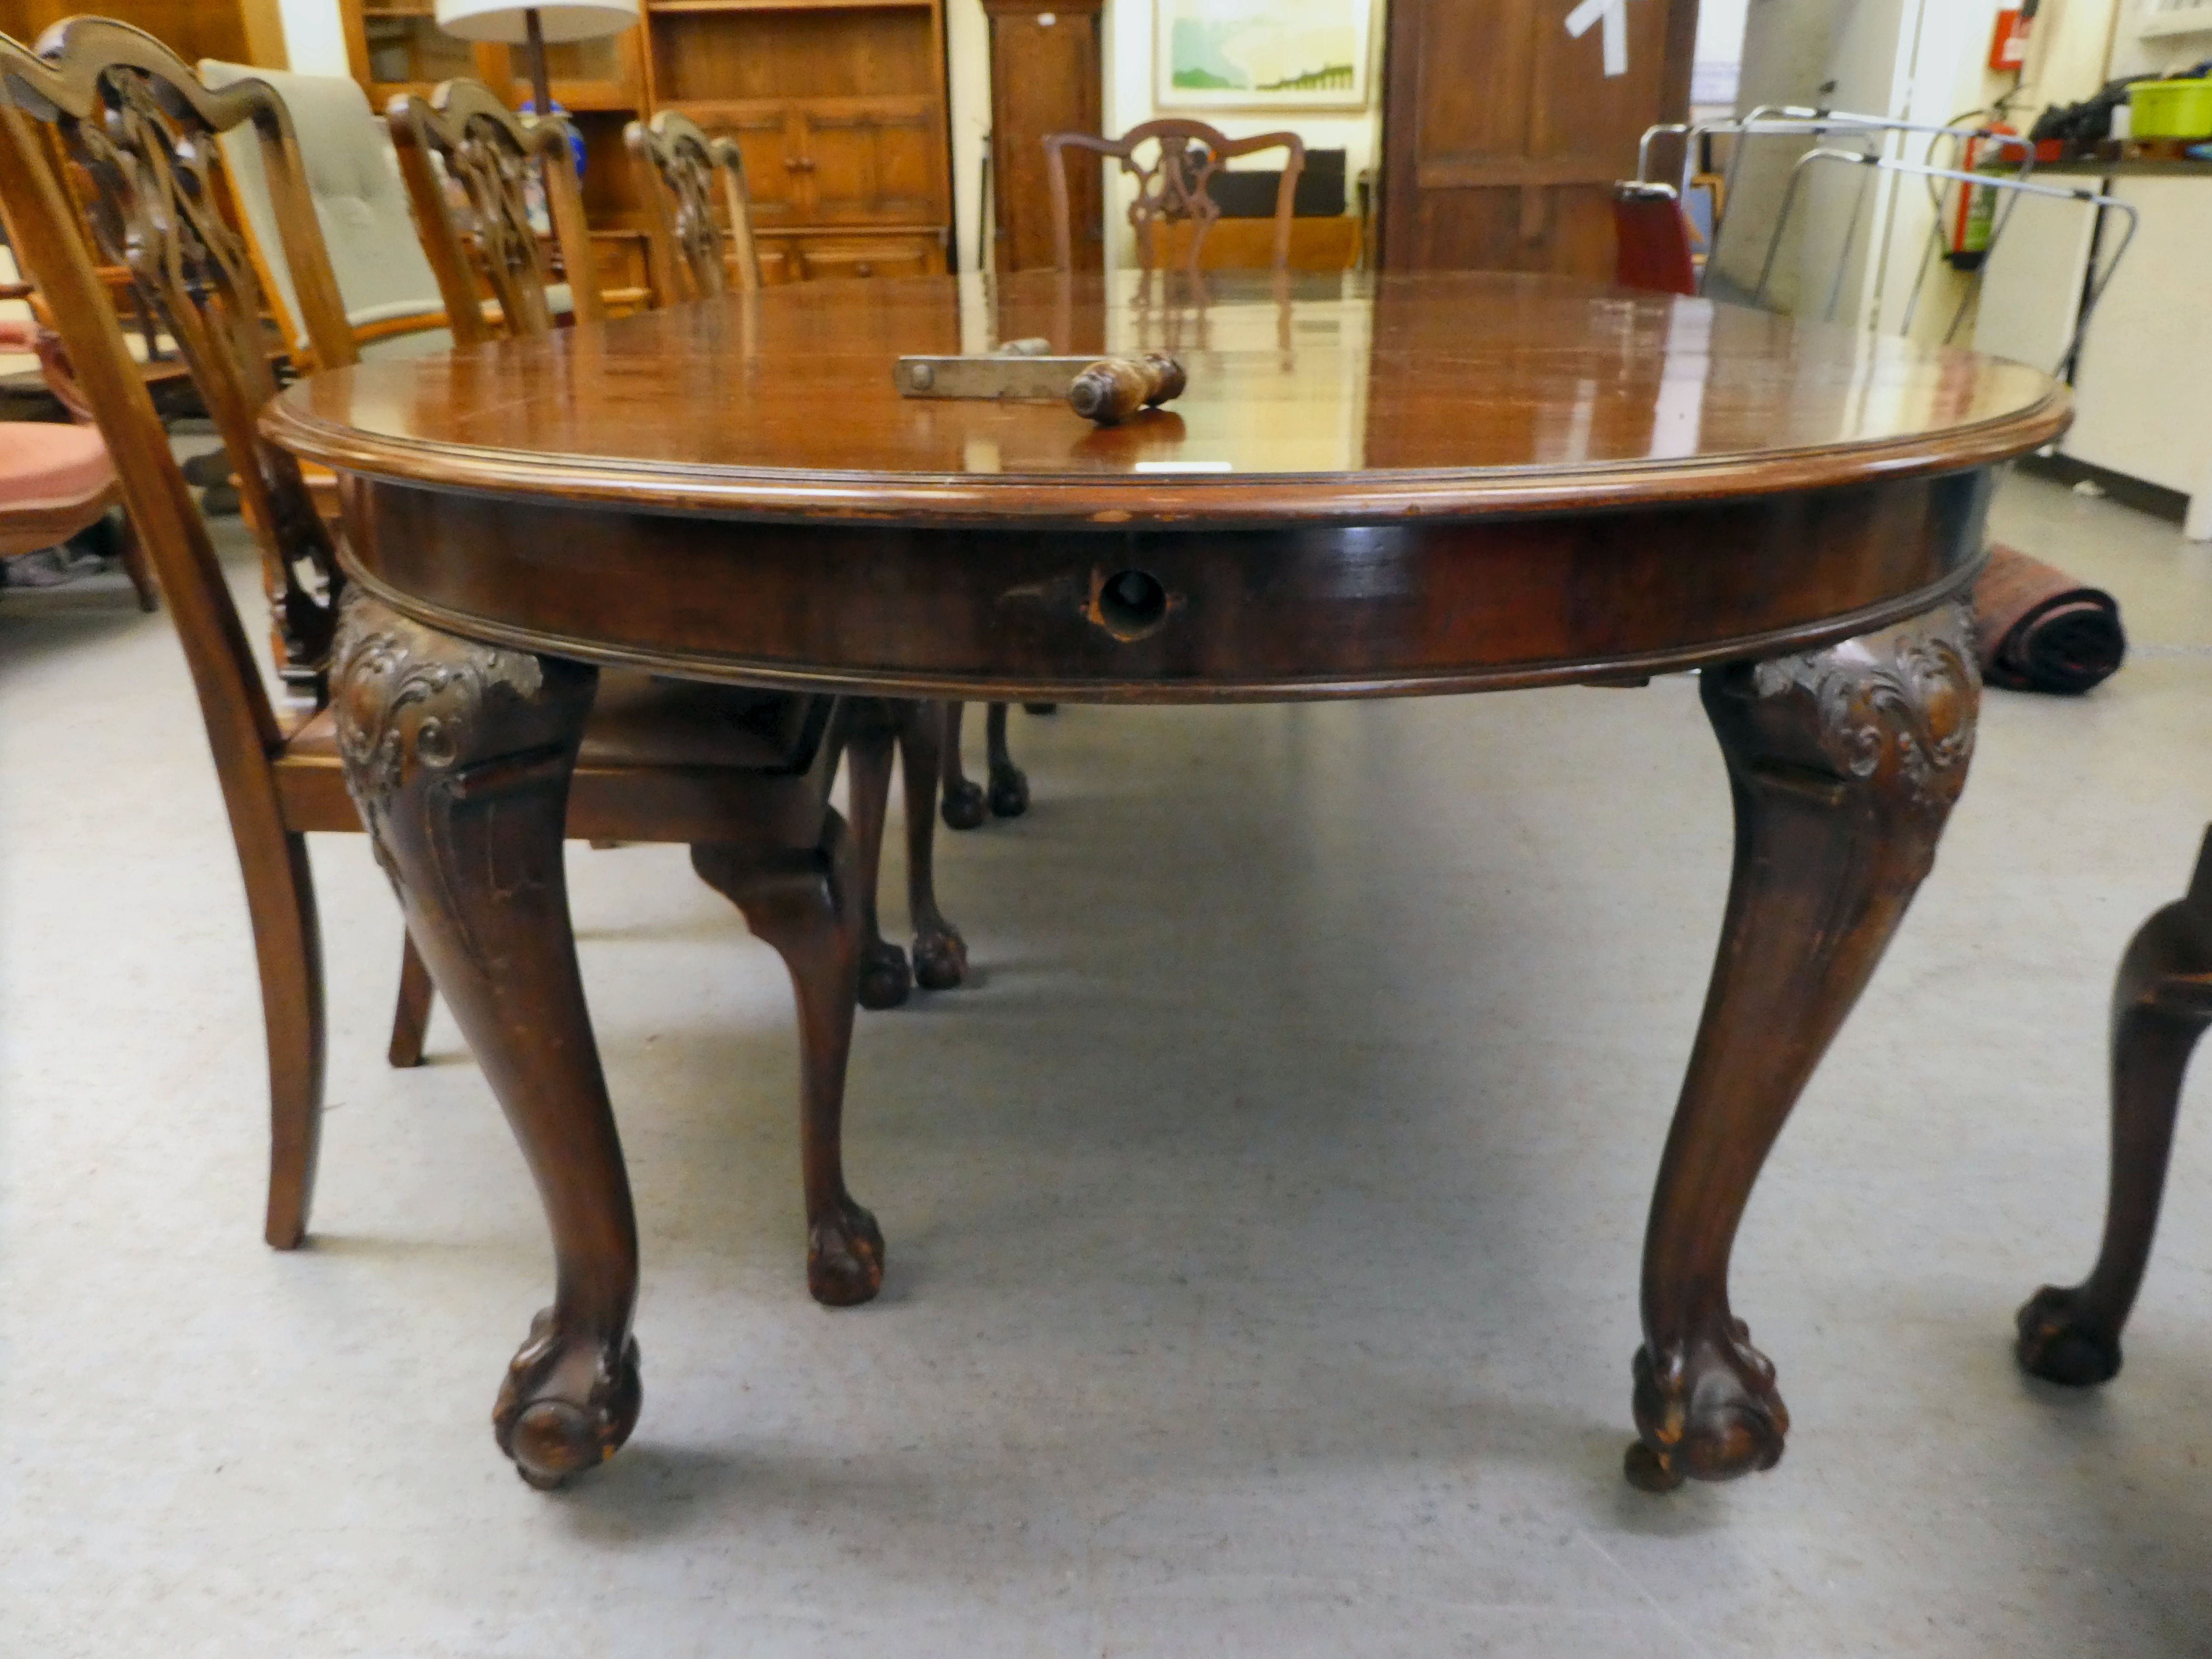 A 1920s mahogany wind-out dining table, raised on cabriole legs, talon and ball feet  29"h  46"L - Image 3 of 5